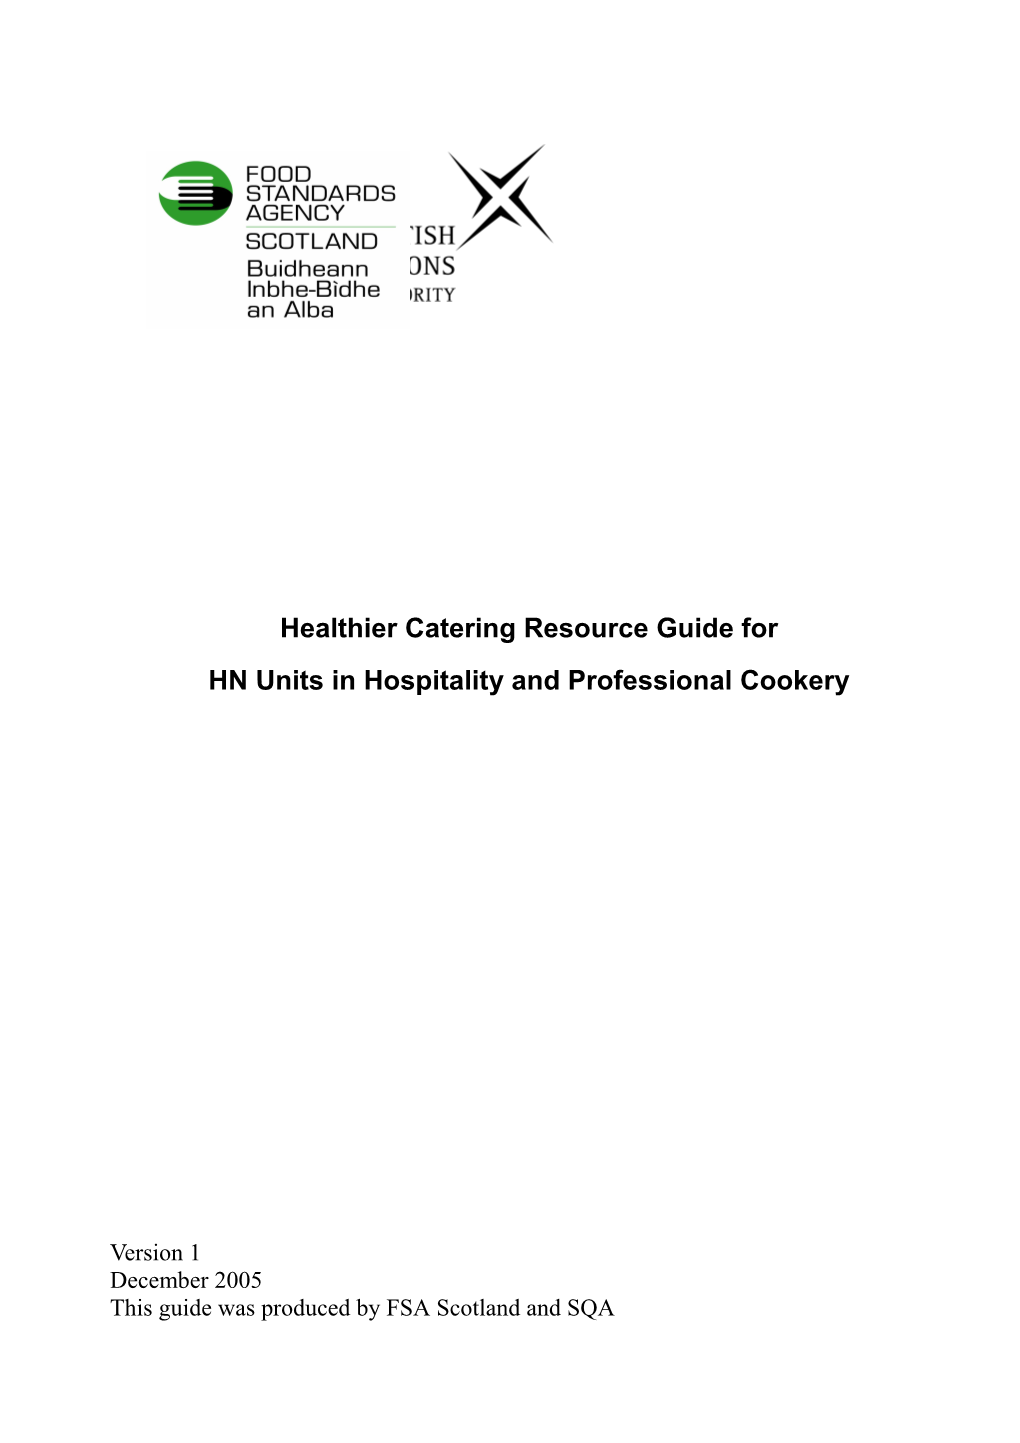 Units with Healthy Eating Potential HN Hospitality and Professional Cookery